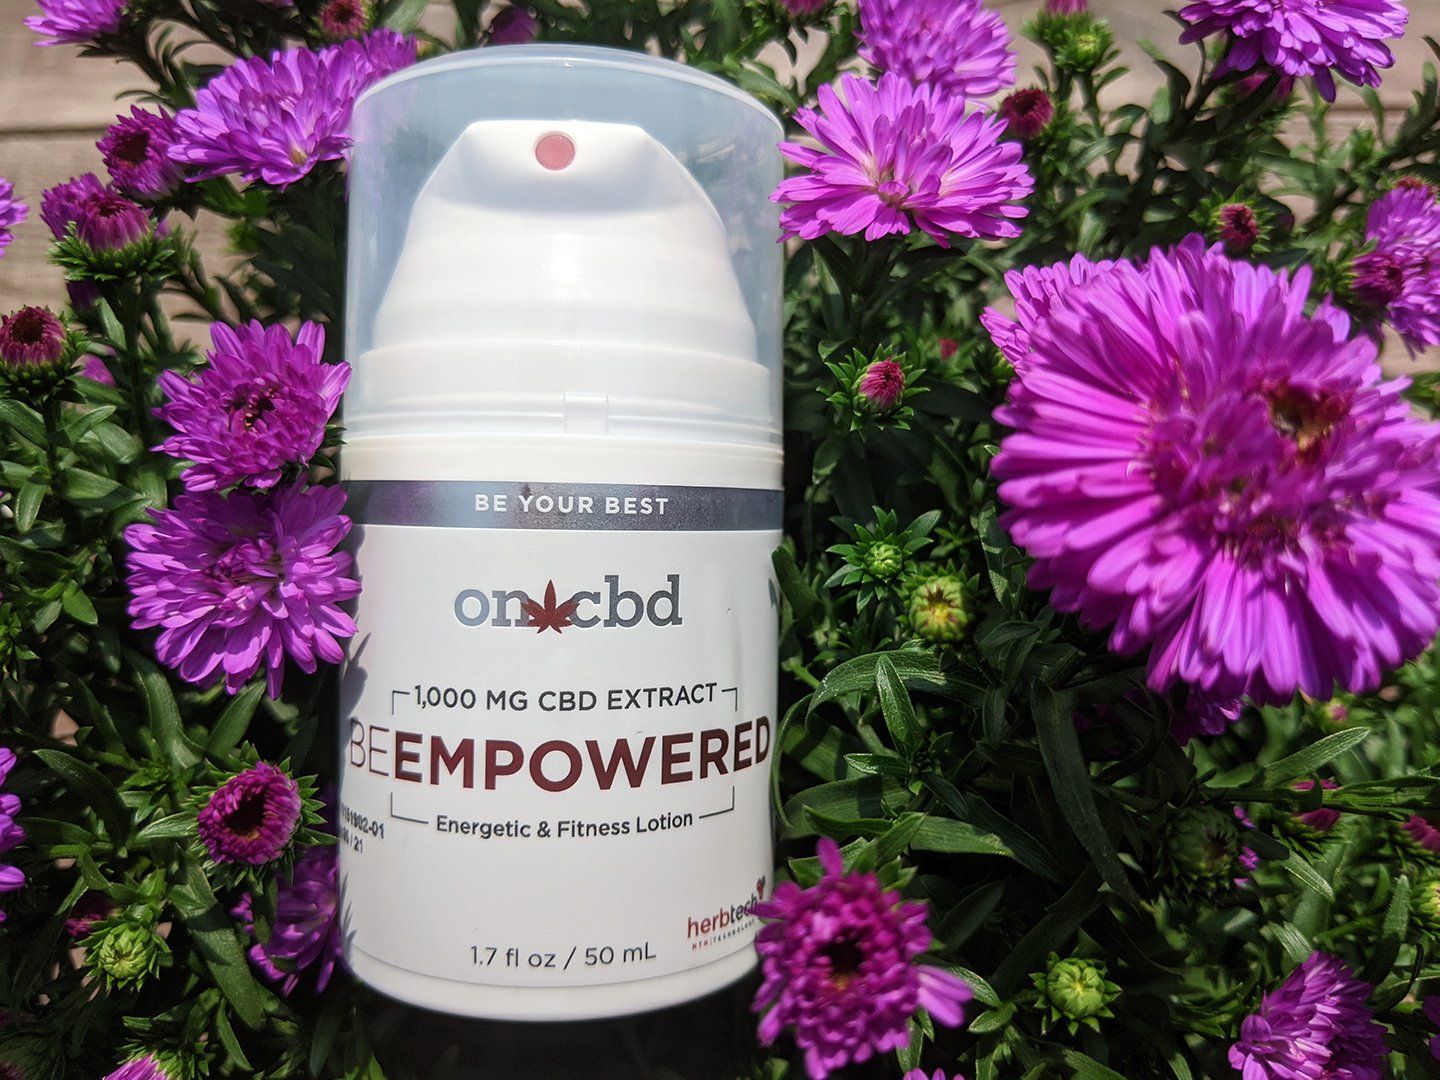 On CBD Be Empowered among flowers